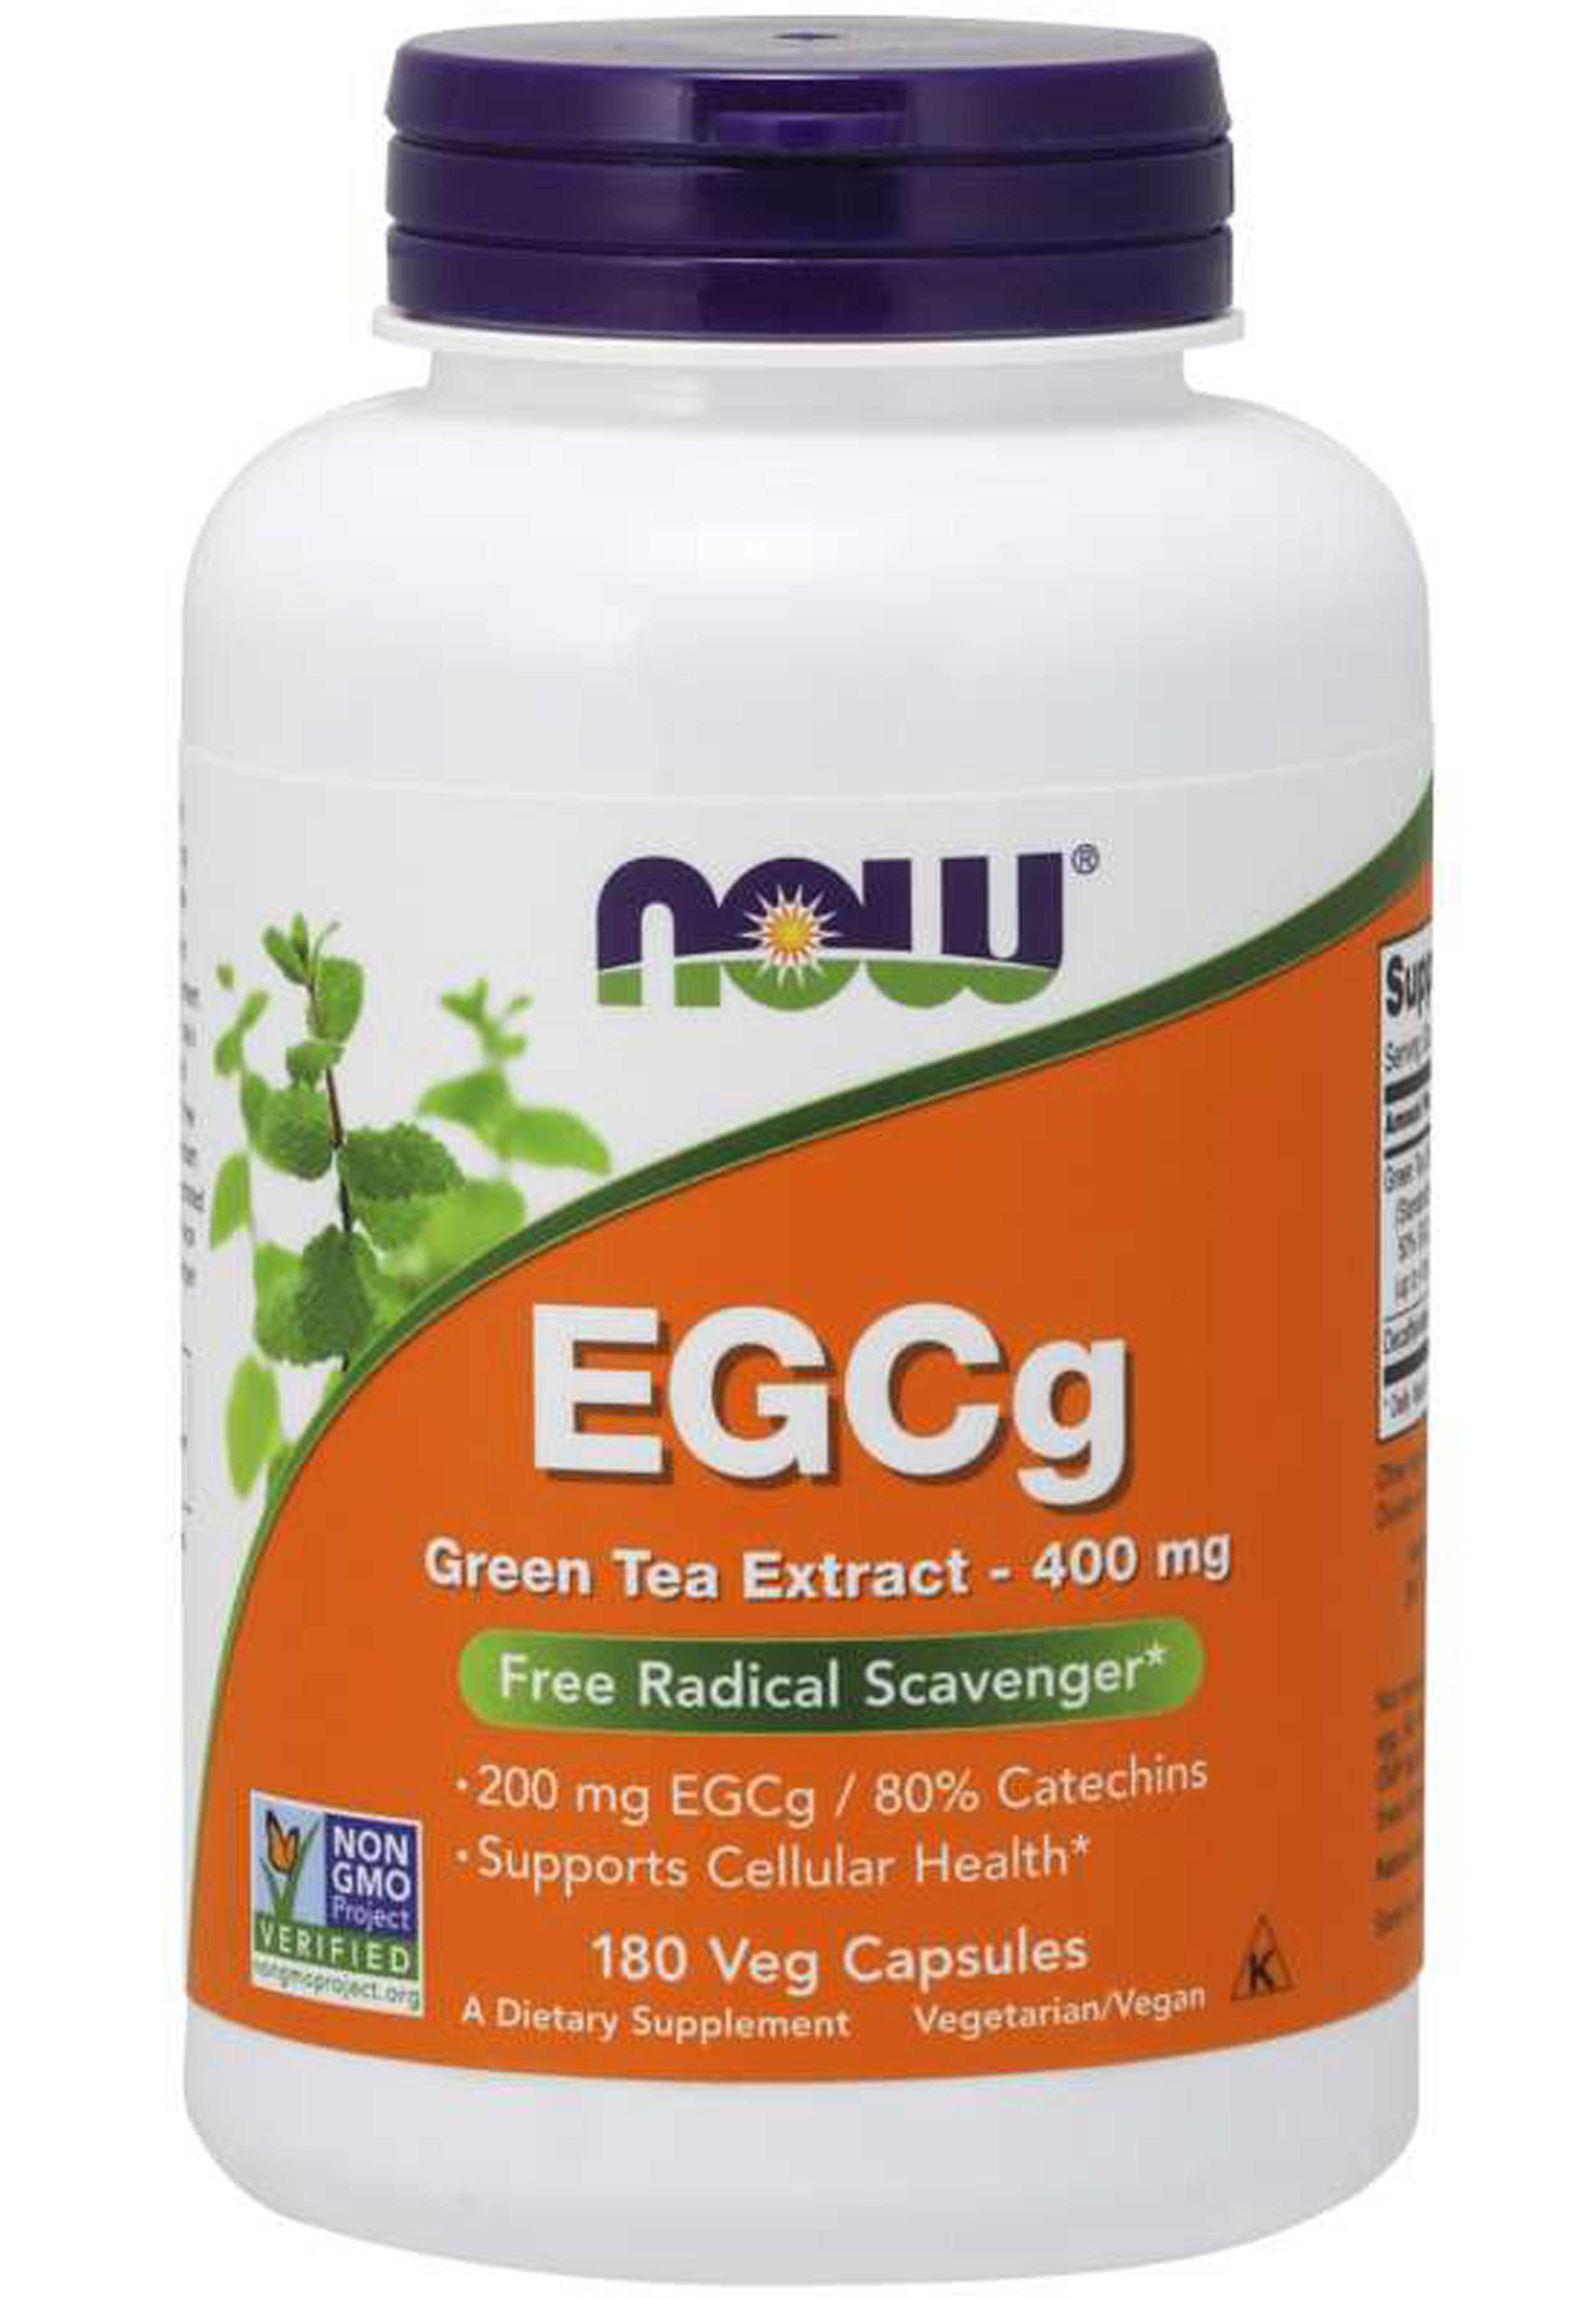 NOW EGCg 400 mg